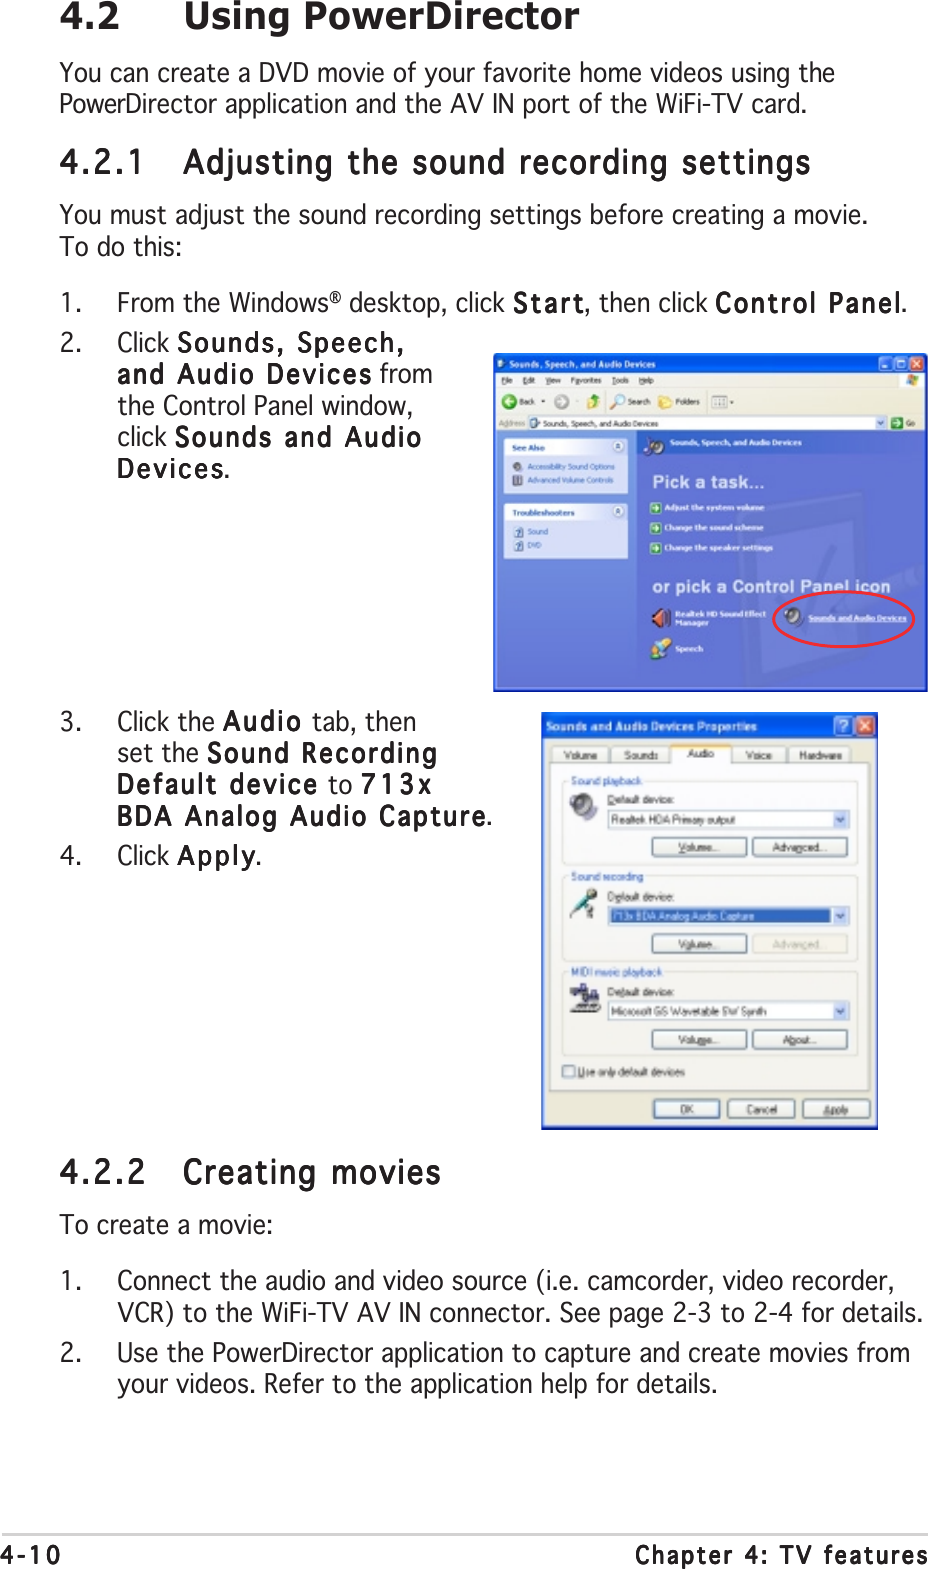 4-104-104-104-104-10 Chapter 4: TV featuresChapter 4: TV featuresChapter 4: TV featuresChapter 4: TV featuresChapter 4: TV features4.2 Using PowerDirectorYou can create a DVD movie of your favorite home videos using thePowerDirector application and the AV IN port of the WiFi-TV card.4.2.14.2.14.2.14.2.14.2.1 Adjusting the sound recording settingsAdjusting the sound recording settingsAdjusting the sound recording settingsAdjusting the sound recording settingsAdjusting the sound recording settingsYou must adjust the sound recording settings before creating a movie.To do this:1. From the Windows® desktop, click StartStartStartStartStart, then click Control PanelControl PanelControl PanelControl PanelControl Panel.2. Click Sounds, Speech,Sounds, Speech,Sounds, Speech,Sounds, Speech,Sounds, Speech,and Audio Devicesand Audio Devicesand Audio Devicesand Audio Devicesand Audio Devices fromthe Control Panel window,click Sounds and AudioSounds and AudioSounds and AudioSounds and AudioSounds and AudioDevicesDevicesDevicesDevicesDevices.3. Click the Audio Audio Audio Audio Audio tab, thenset the Sound RecordingSound RecordingSound RecordingSound RecordingSound RecordingDefault device Default device Default device Default device Default device to 713x713x713x713x713xBDA Analog Audio CaptureBDA Analog Audio CaptureBDA Analog Audio CaptureBDA Analog Audio CaptureBDA Analog Audio Capture.4. Click ApplyApplyApplyApplyApply.4.2.24.2.24.2.24.2.24.2.2 Creating moviesCreating moviesCreating moviesCreating moviesCreating moviesTo create a movie:1. Connect the audio and video source (i.e. camcorder, video recorder,VCR) to the WiFi-TV AV IN connector. See page 2-3 to 2-4 for details.2. Use the PowerDirector application to capture and create movies fromyour videos. Refer to the application help for details.